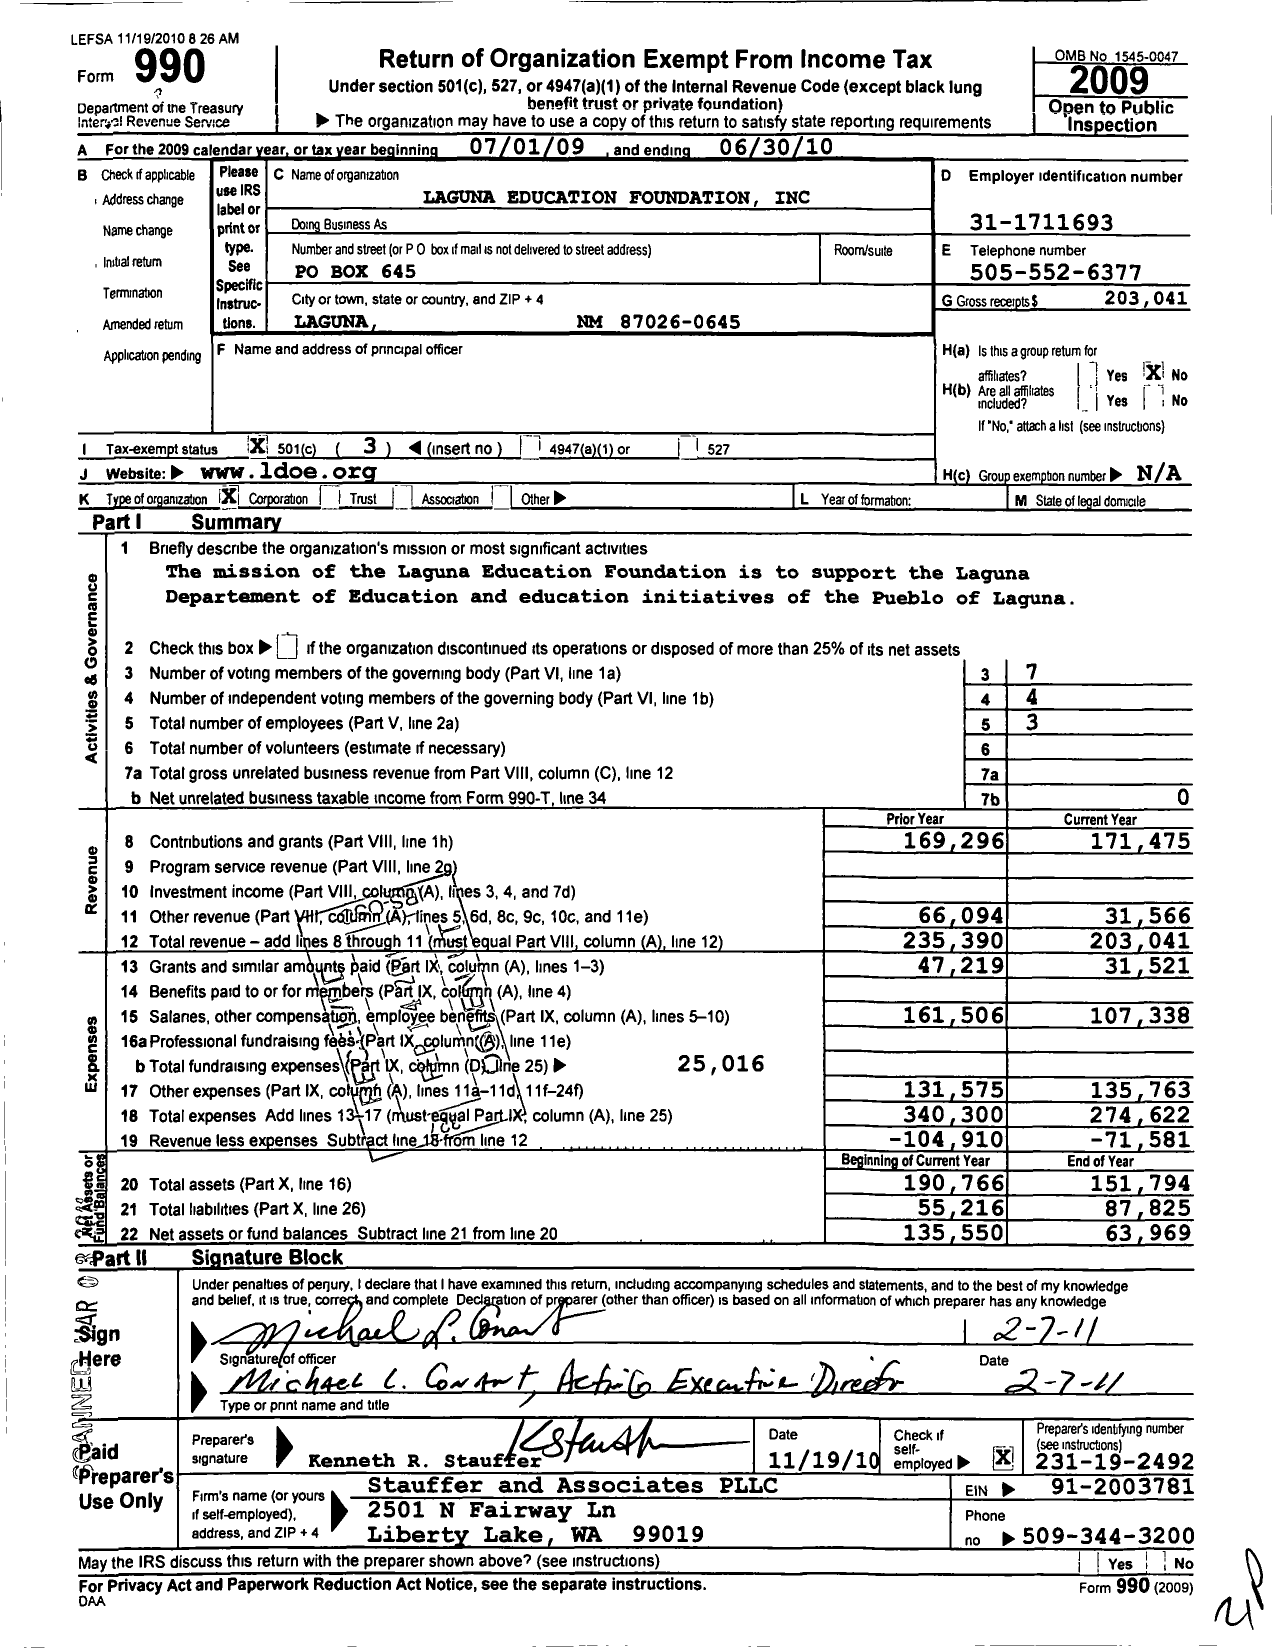 Image of first page of 2009 Form 990 for Laguna Education Foundation (LEF)